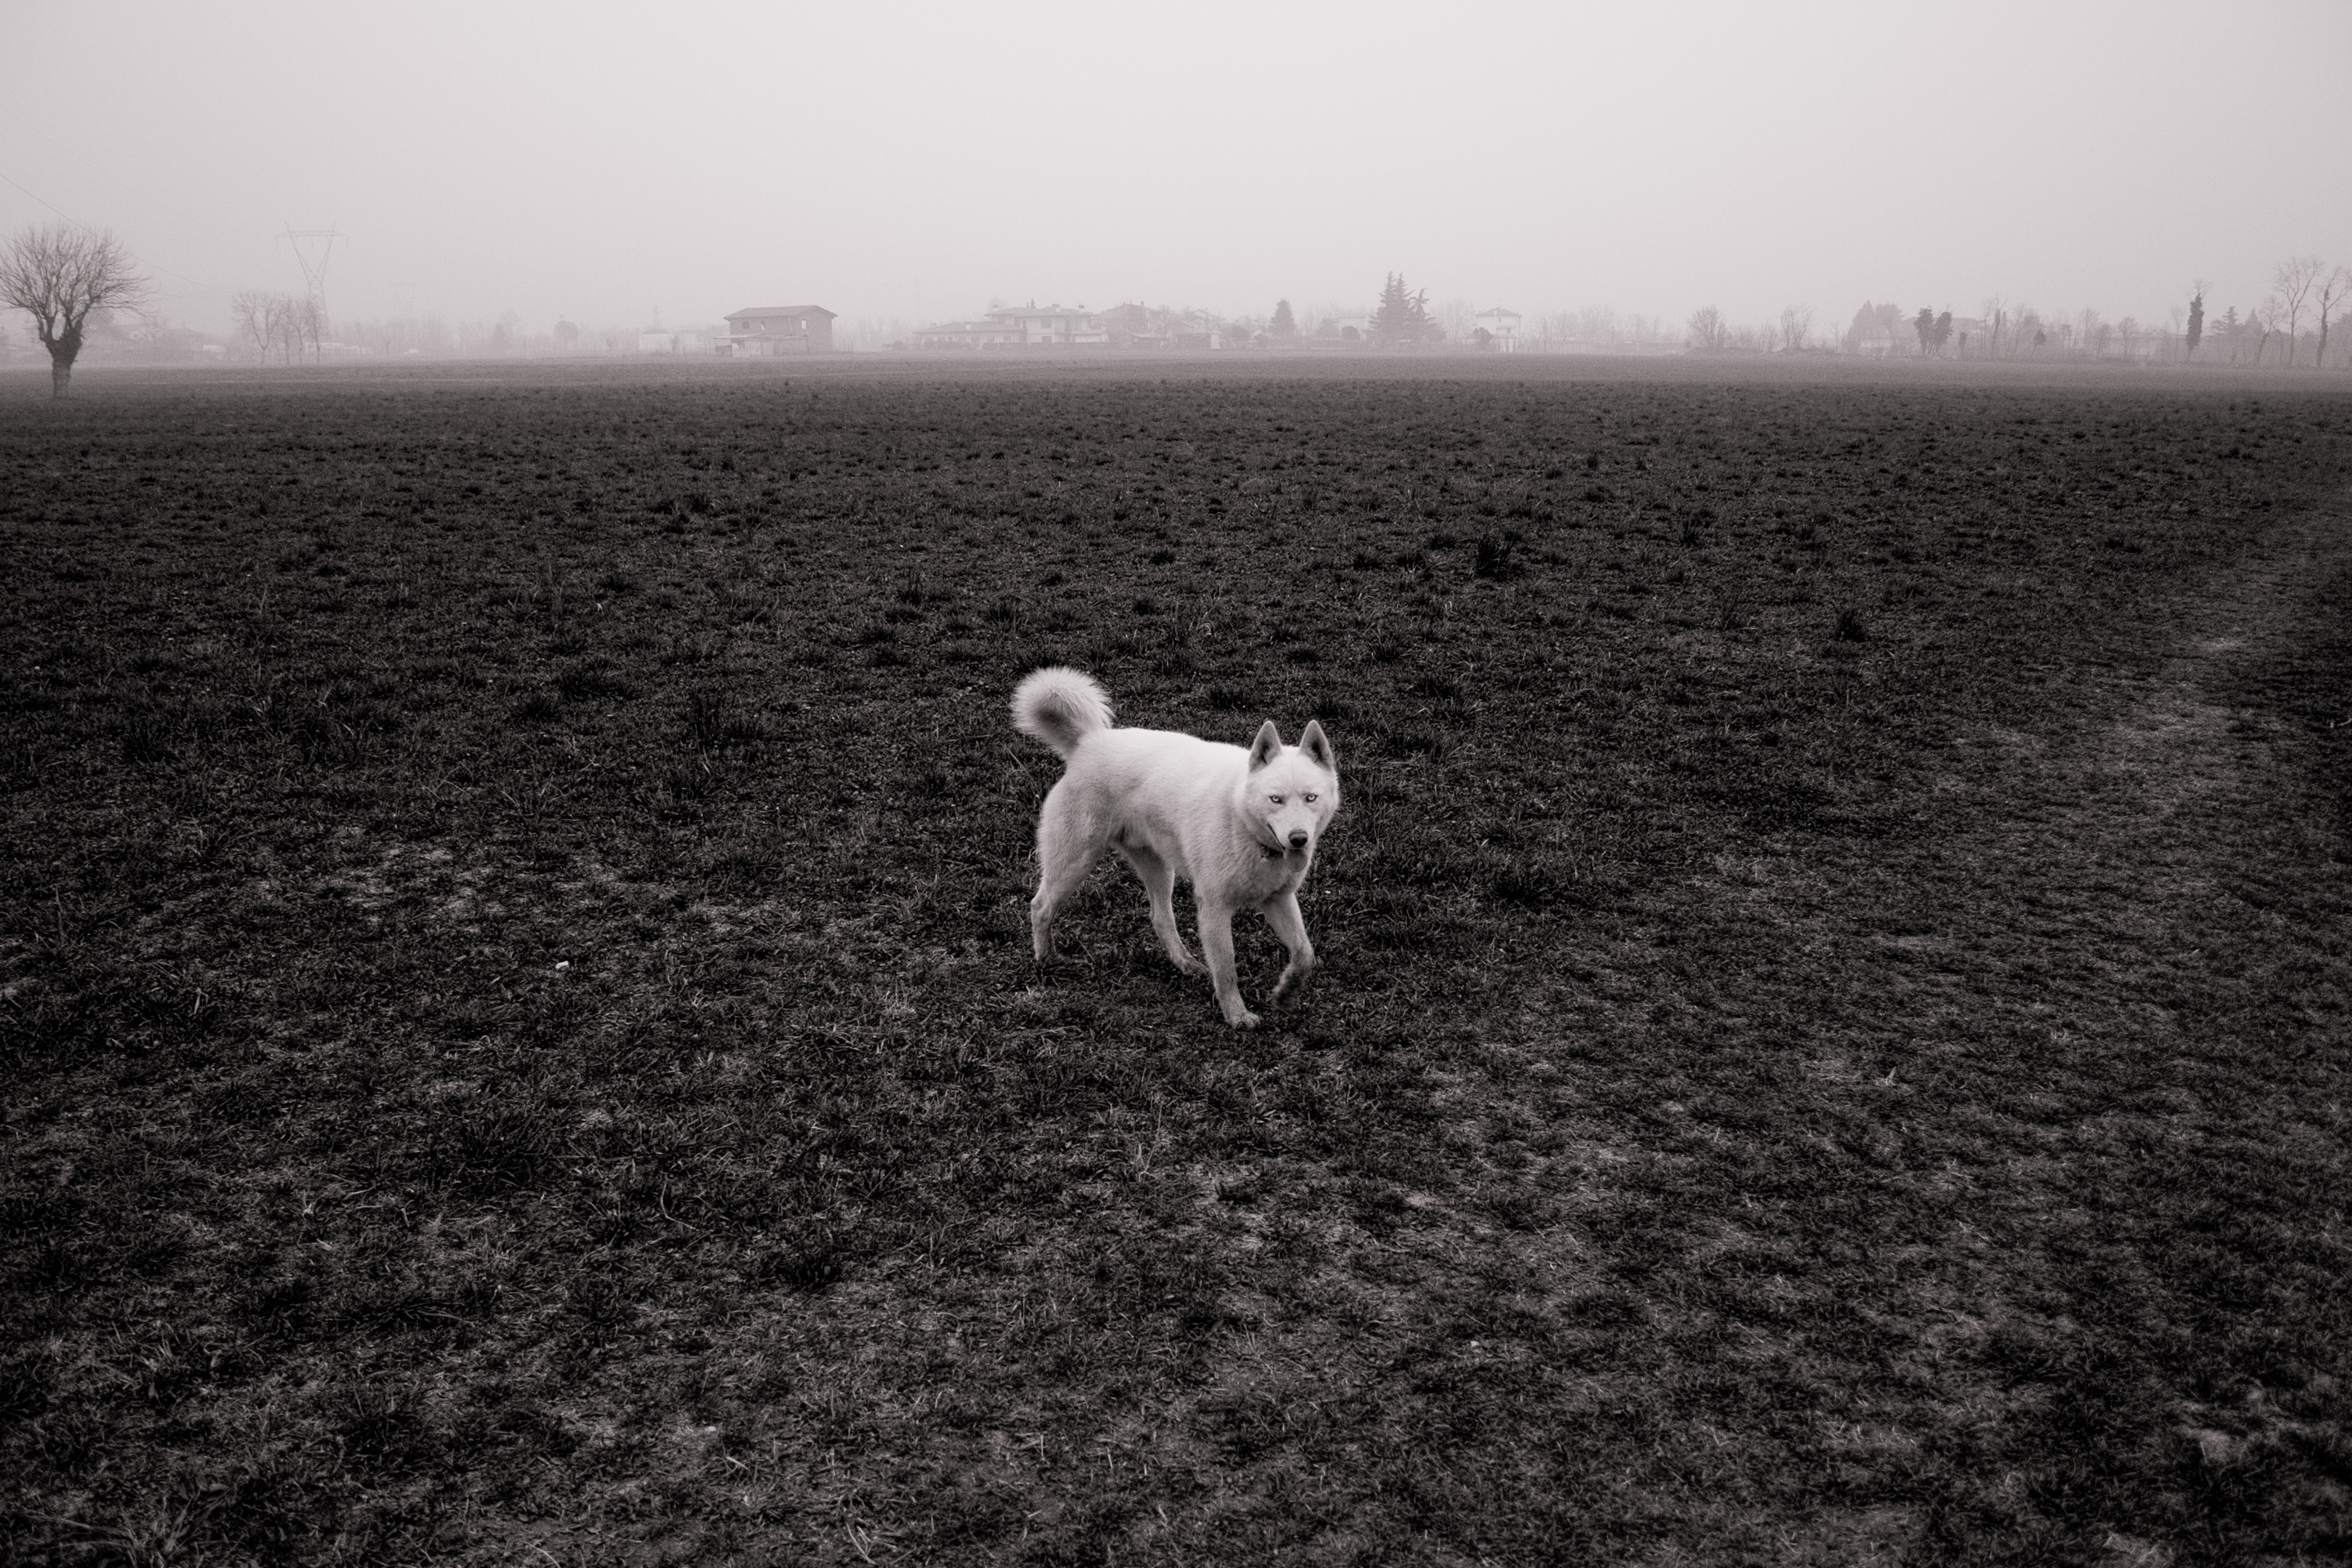 54 · White dog, I
Click to view previous post